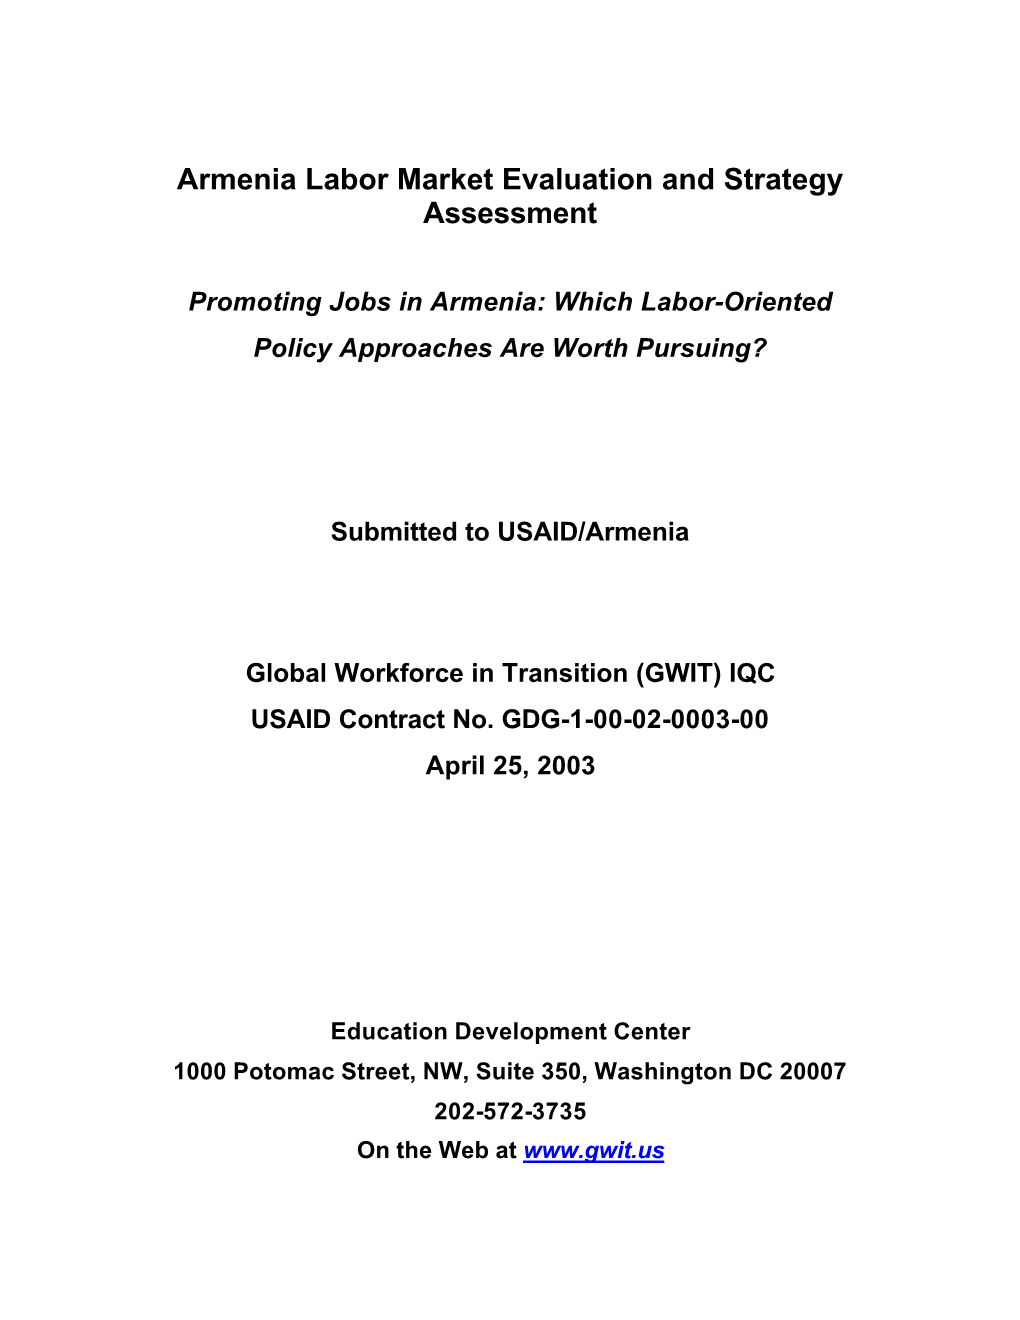 Armenia Labor Market Evaluation and Strategy Assessment